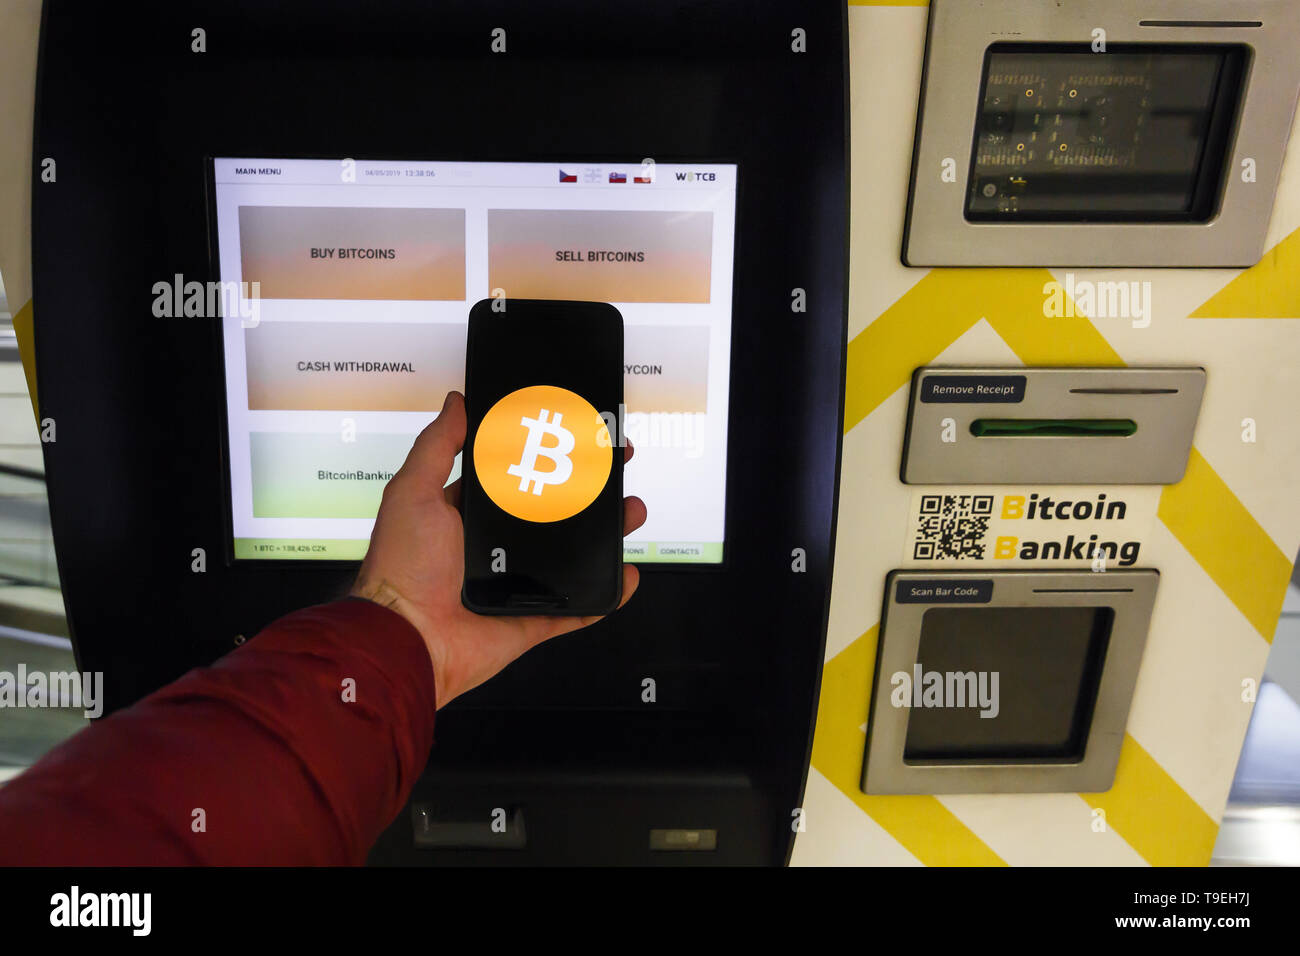 Prague Czech Republic May 18th 2019 Bitcoin Atm Machine For - prague czech republic may 18th 2019 bitcoin atm machine for buying and selling cryptocurrency male sells bitcoins by atm using smartphone prague